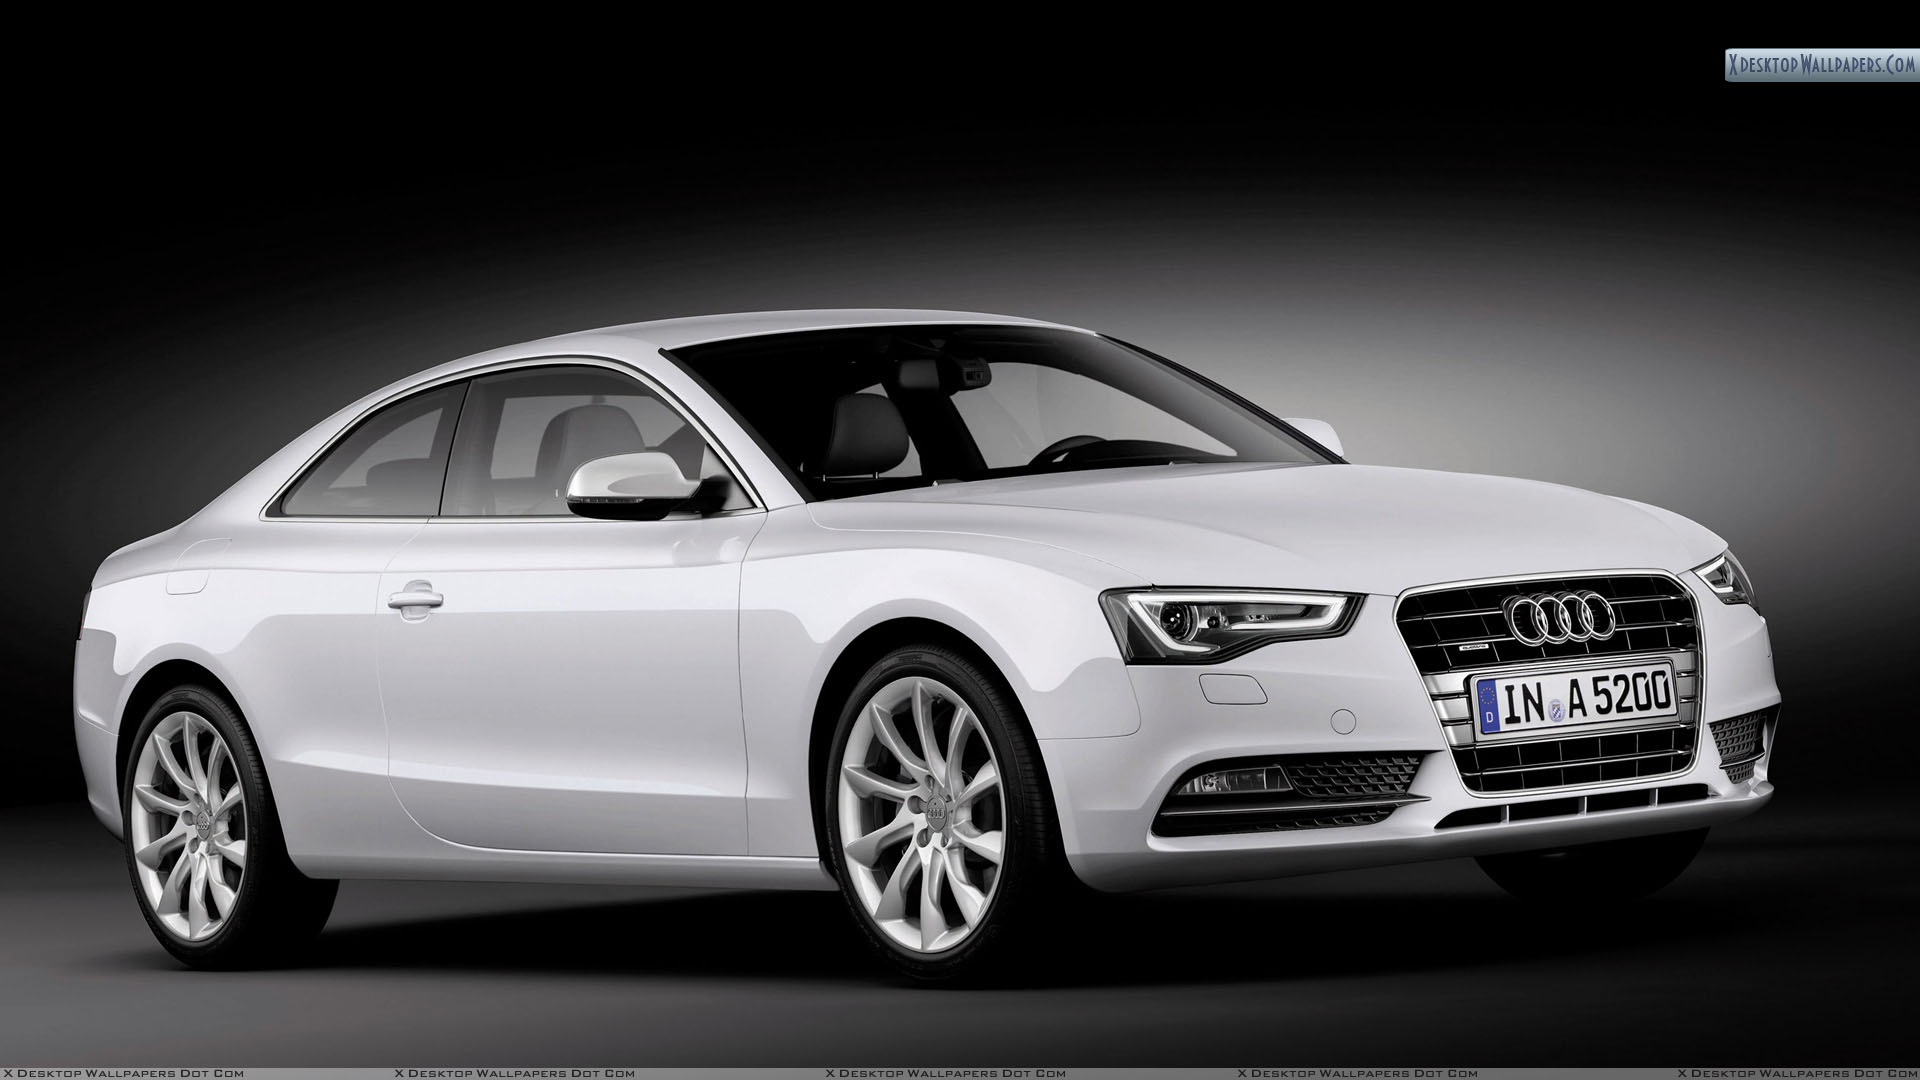 Side Front Pose Of 2012 Audi A5 Coupe Wallpaper Wallpapers - 2016 Audi A8 White - HD Wallpaper 